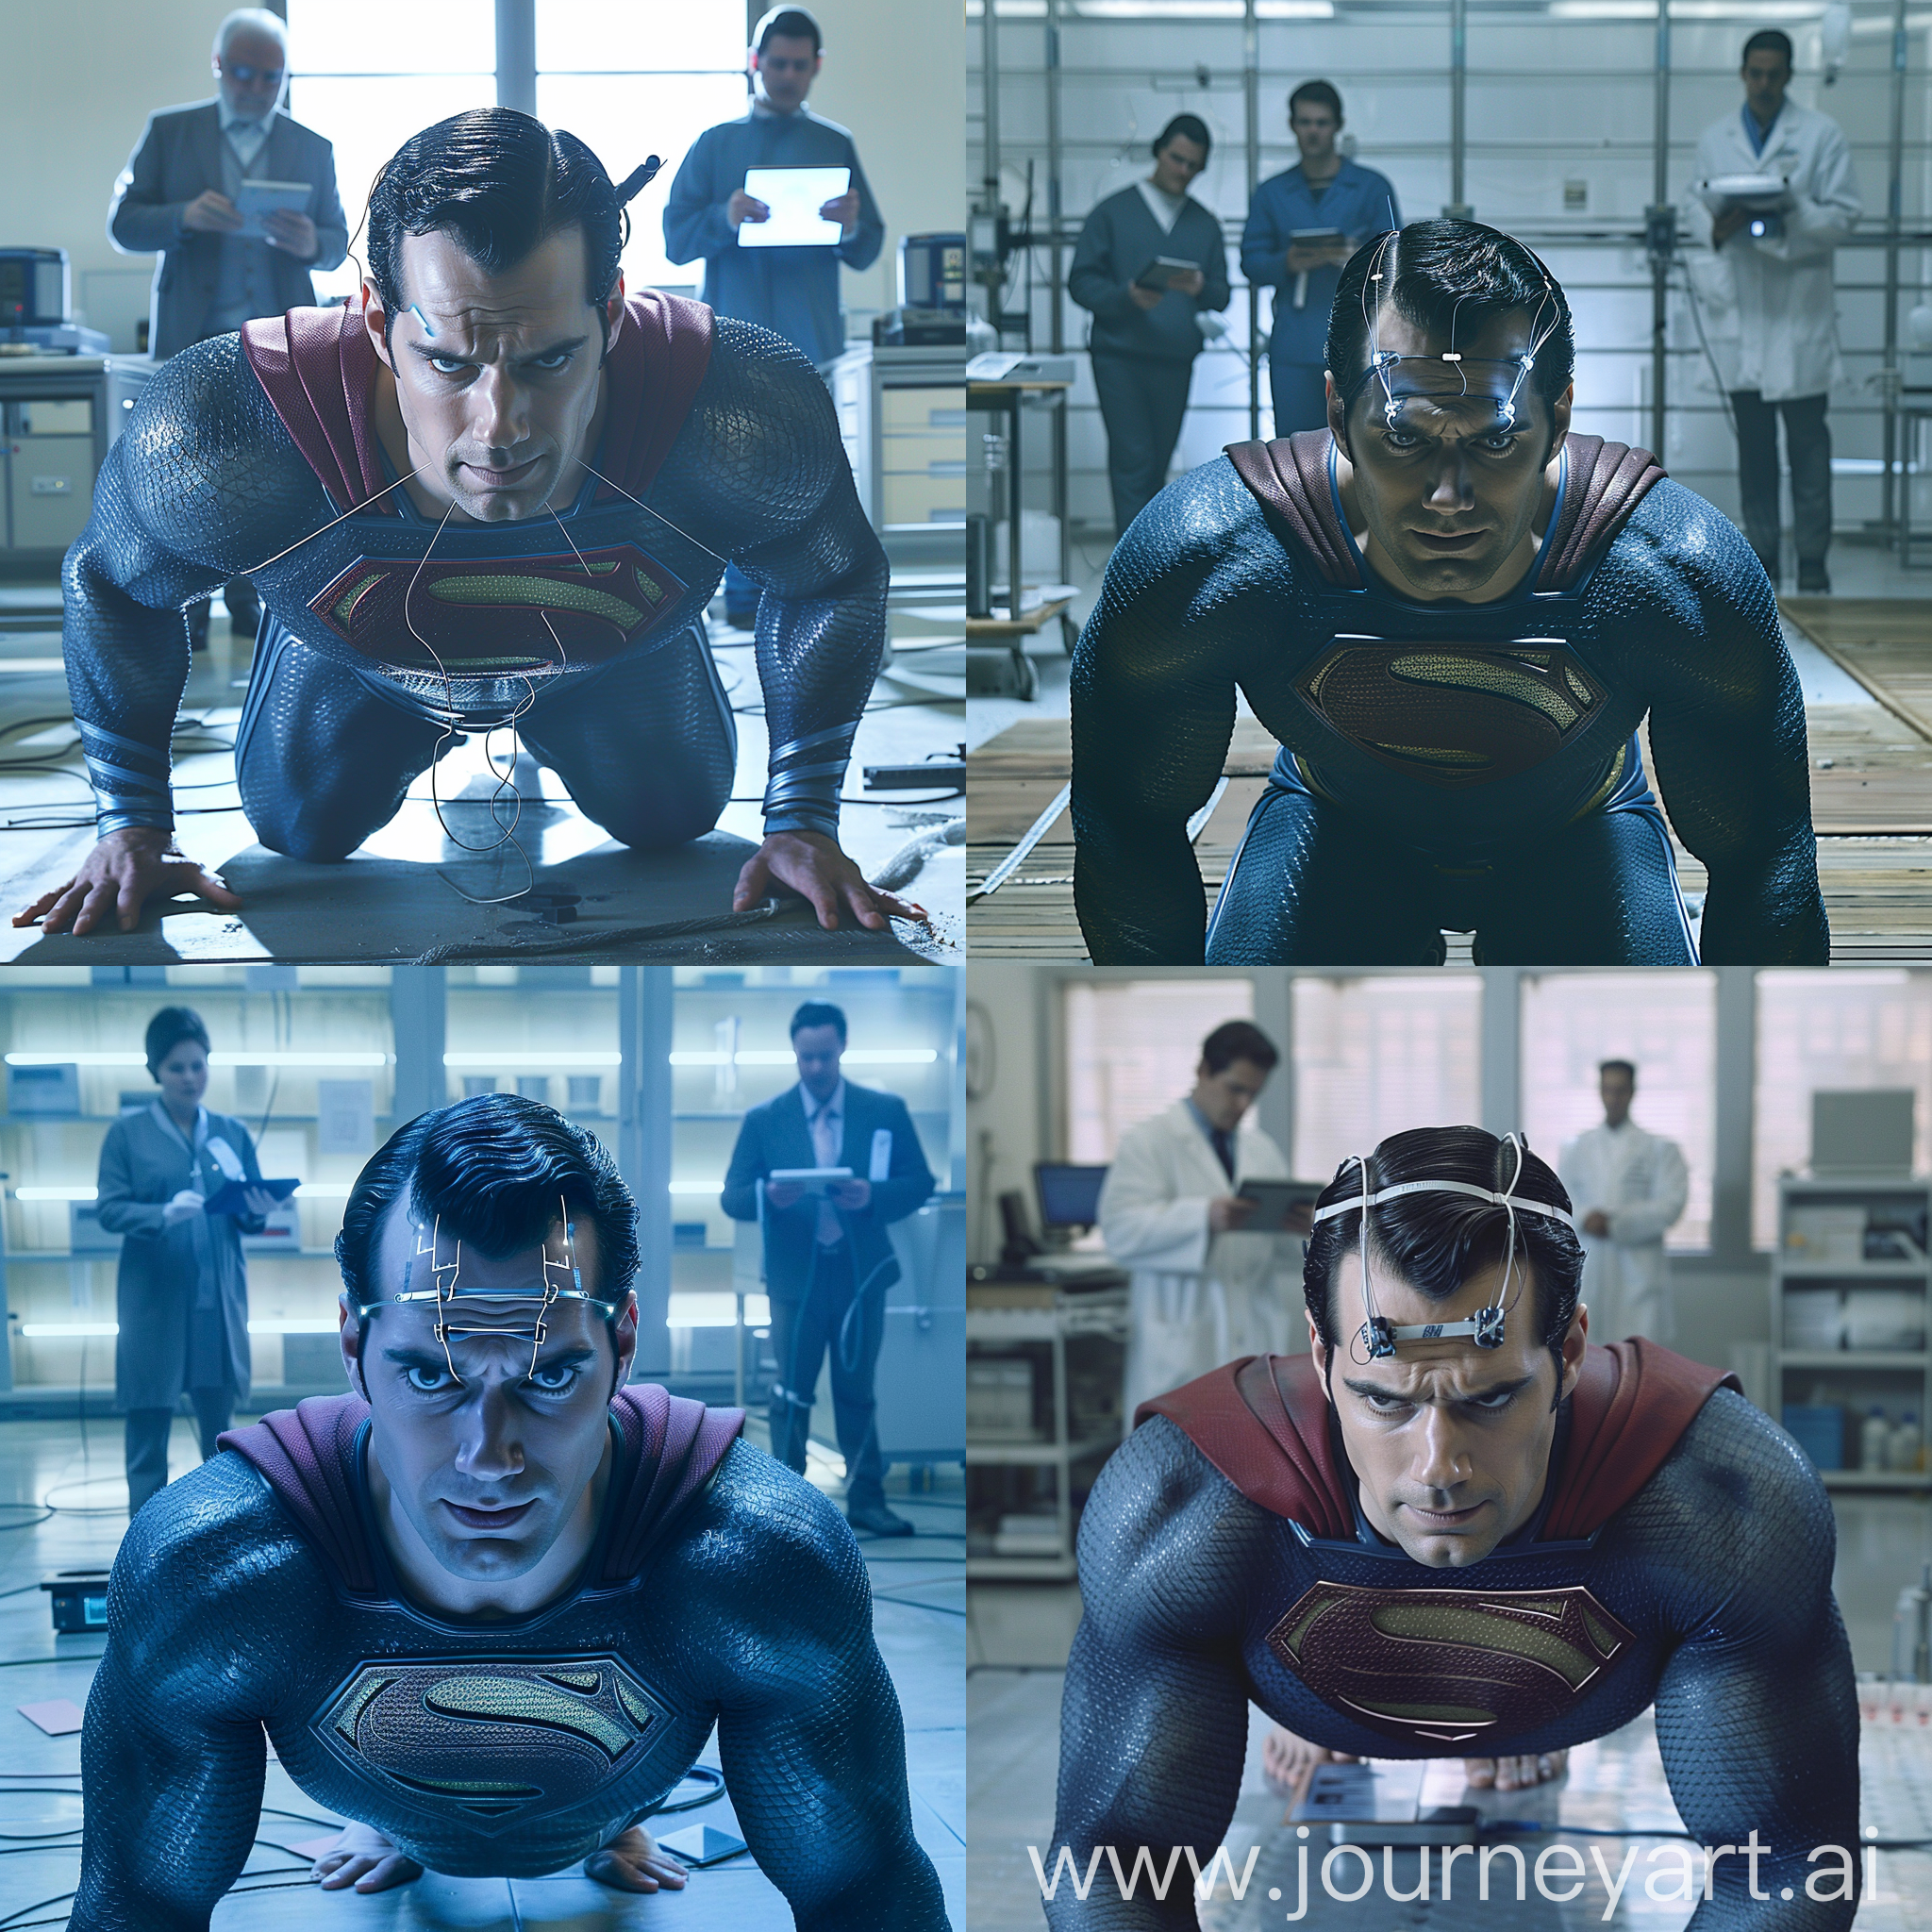 Cinematic lighting, Handsome burly Henry Cavill wearing a superman suit, good looking burly muscular Superman wearing a superman outfit costume, DC superman costume, Crawling on all fours, with two electrodes attached to his forehead, lab background, with two male scientists standing in the background holding tablets, Henry Cavill with a blank face and white milkyeyes, with electrodes attached to his head, technological wires attached to the side of his head